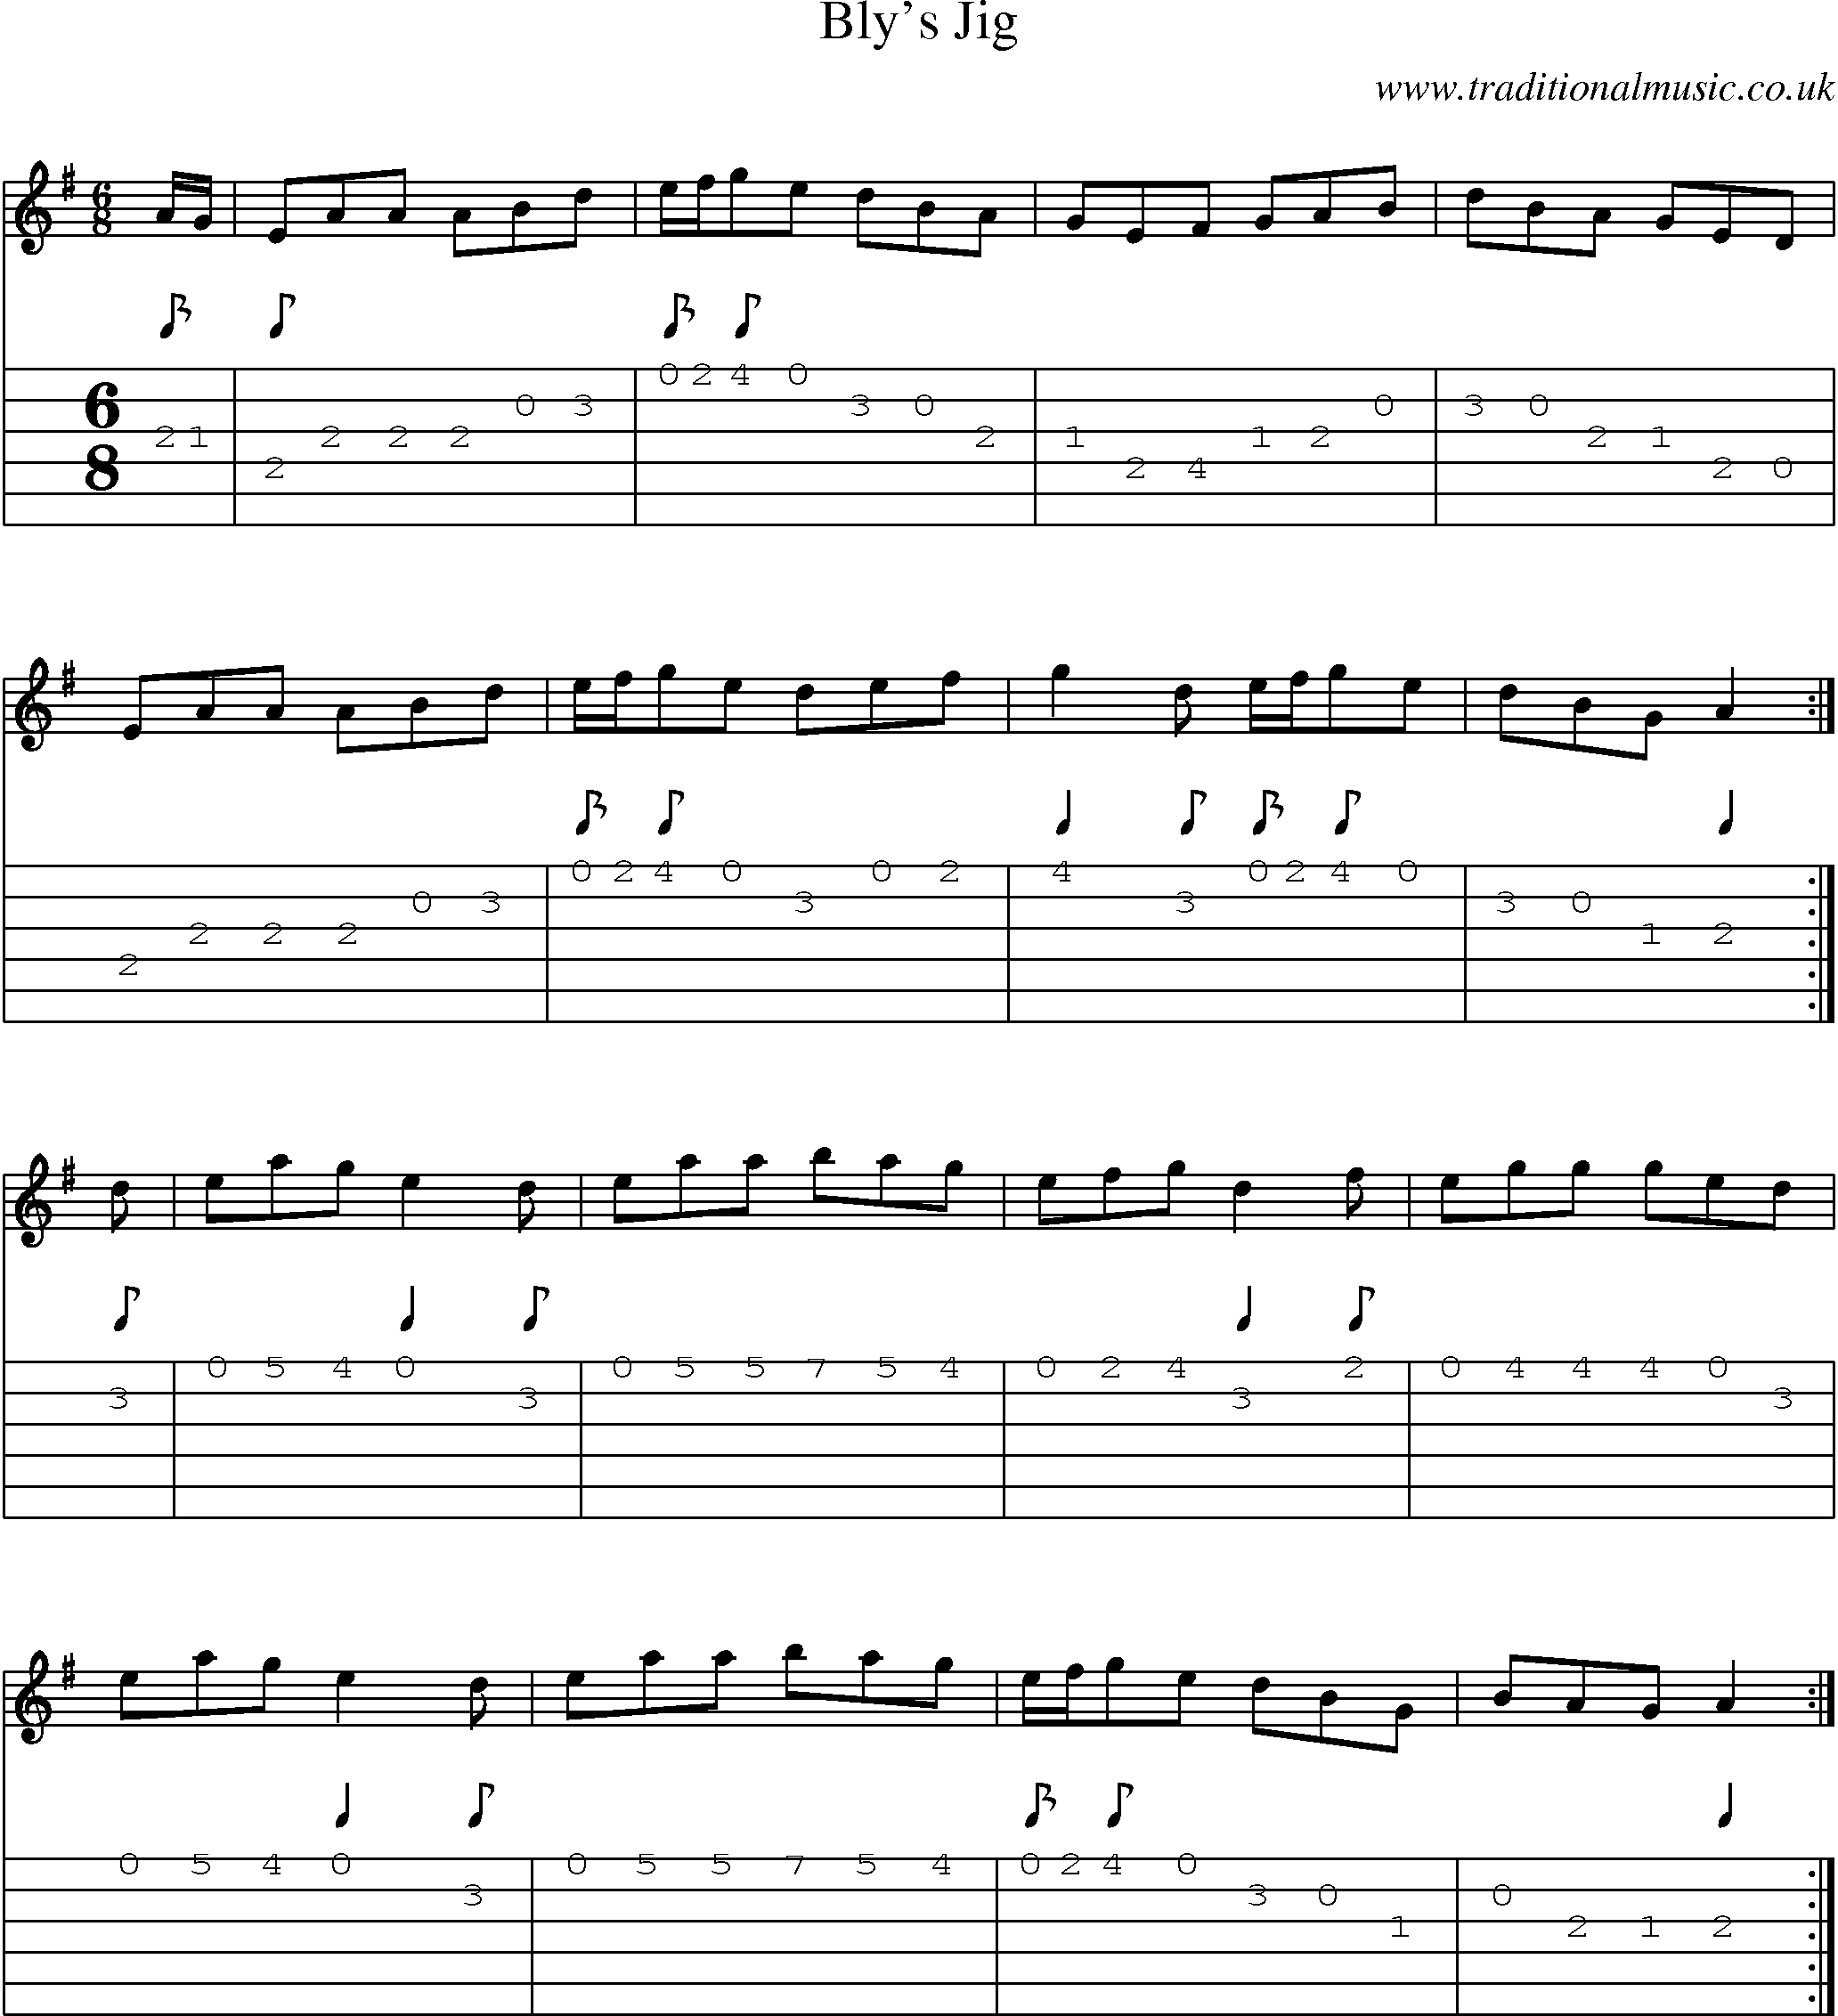 Music Score and Guitar Tabs for Blys Jig